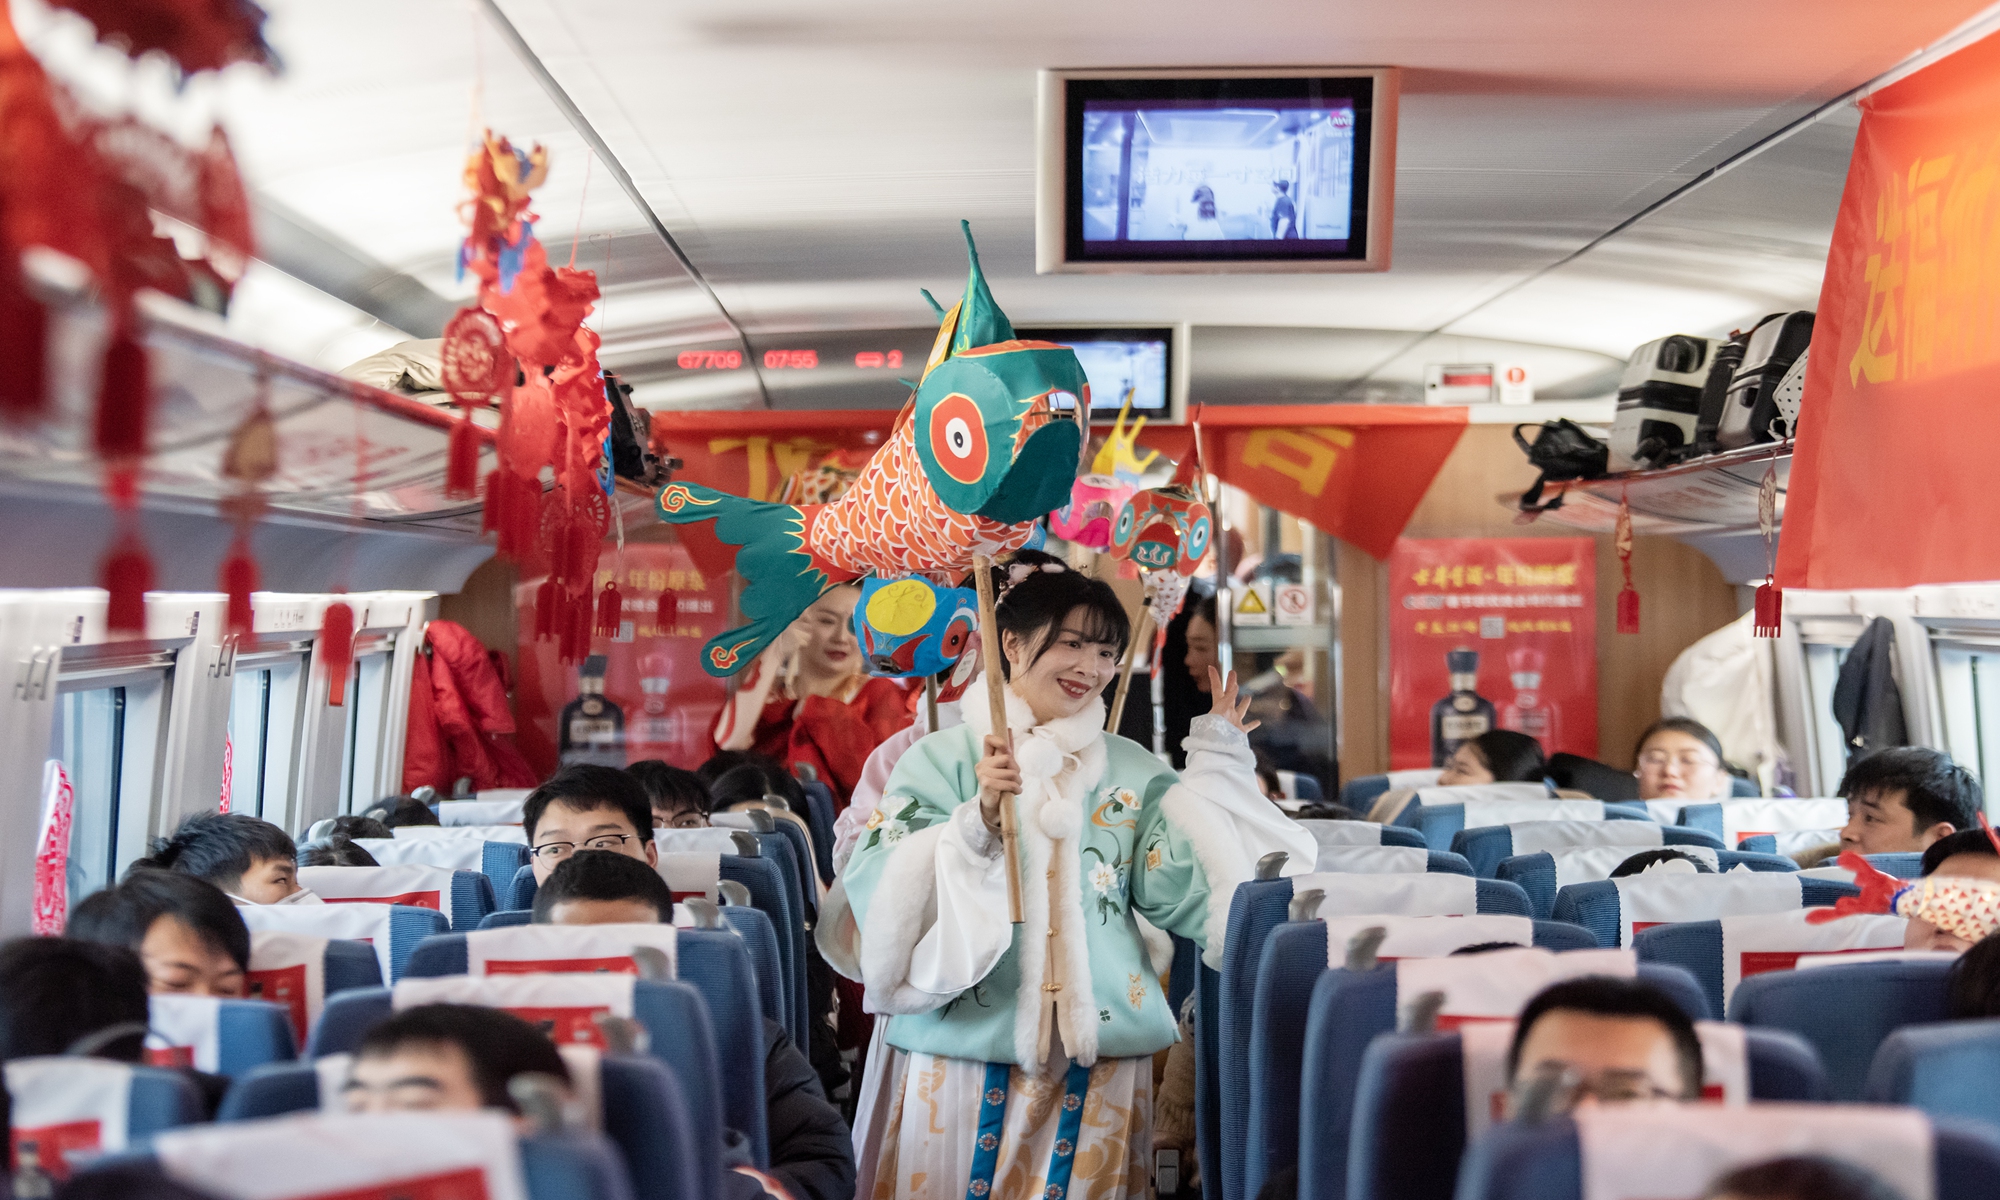 Volunteers perform a show using fish-shaped lanterns at a high-speed train from Xuzhou, East China's Jiangsu Province to Shanghai on January 25, 2024. The show aims to bring good luck to passengers ahead of the upcoming Lunar New Year. The volunteers are from Hefei, East China's Anhui Province, where lighting fish-shaped lanterns is a traditional cultural and folk activity to celebrate the Spring Festival holidays. Photo: VCG